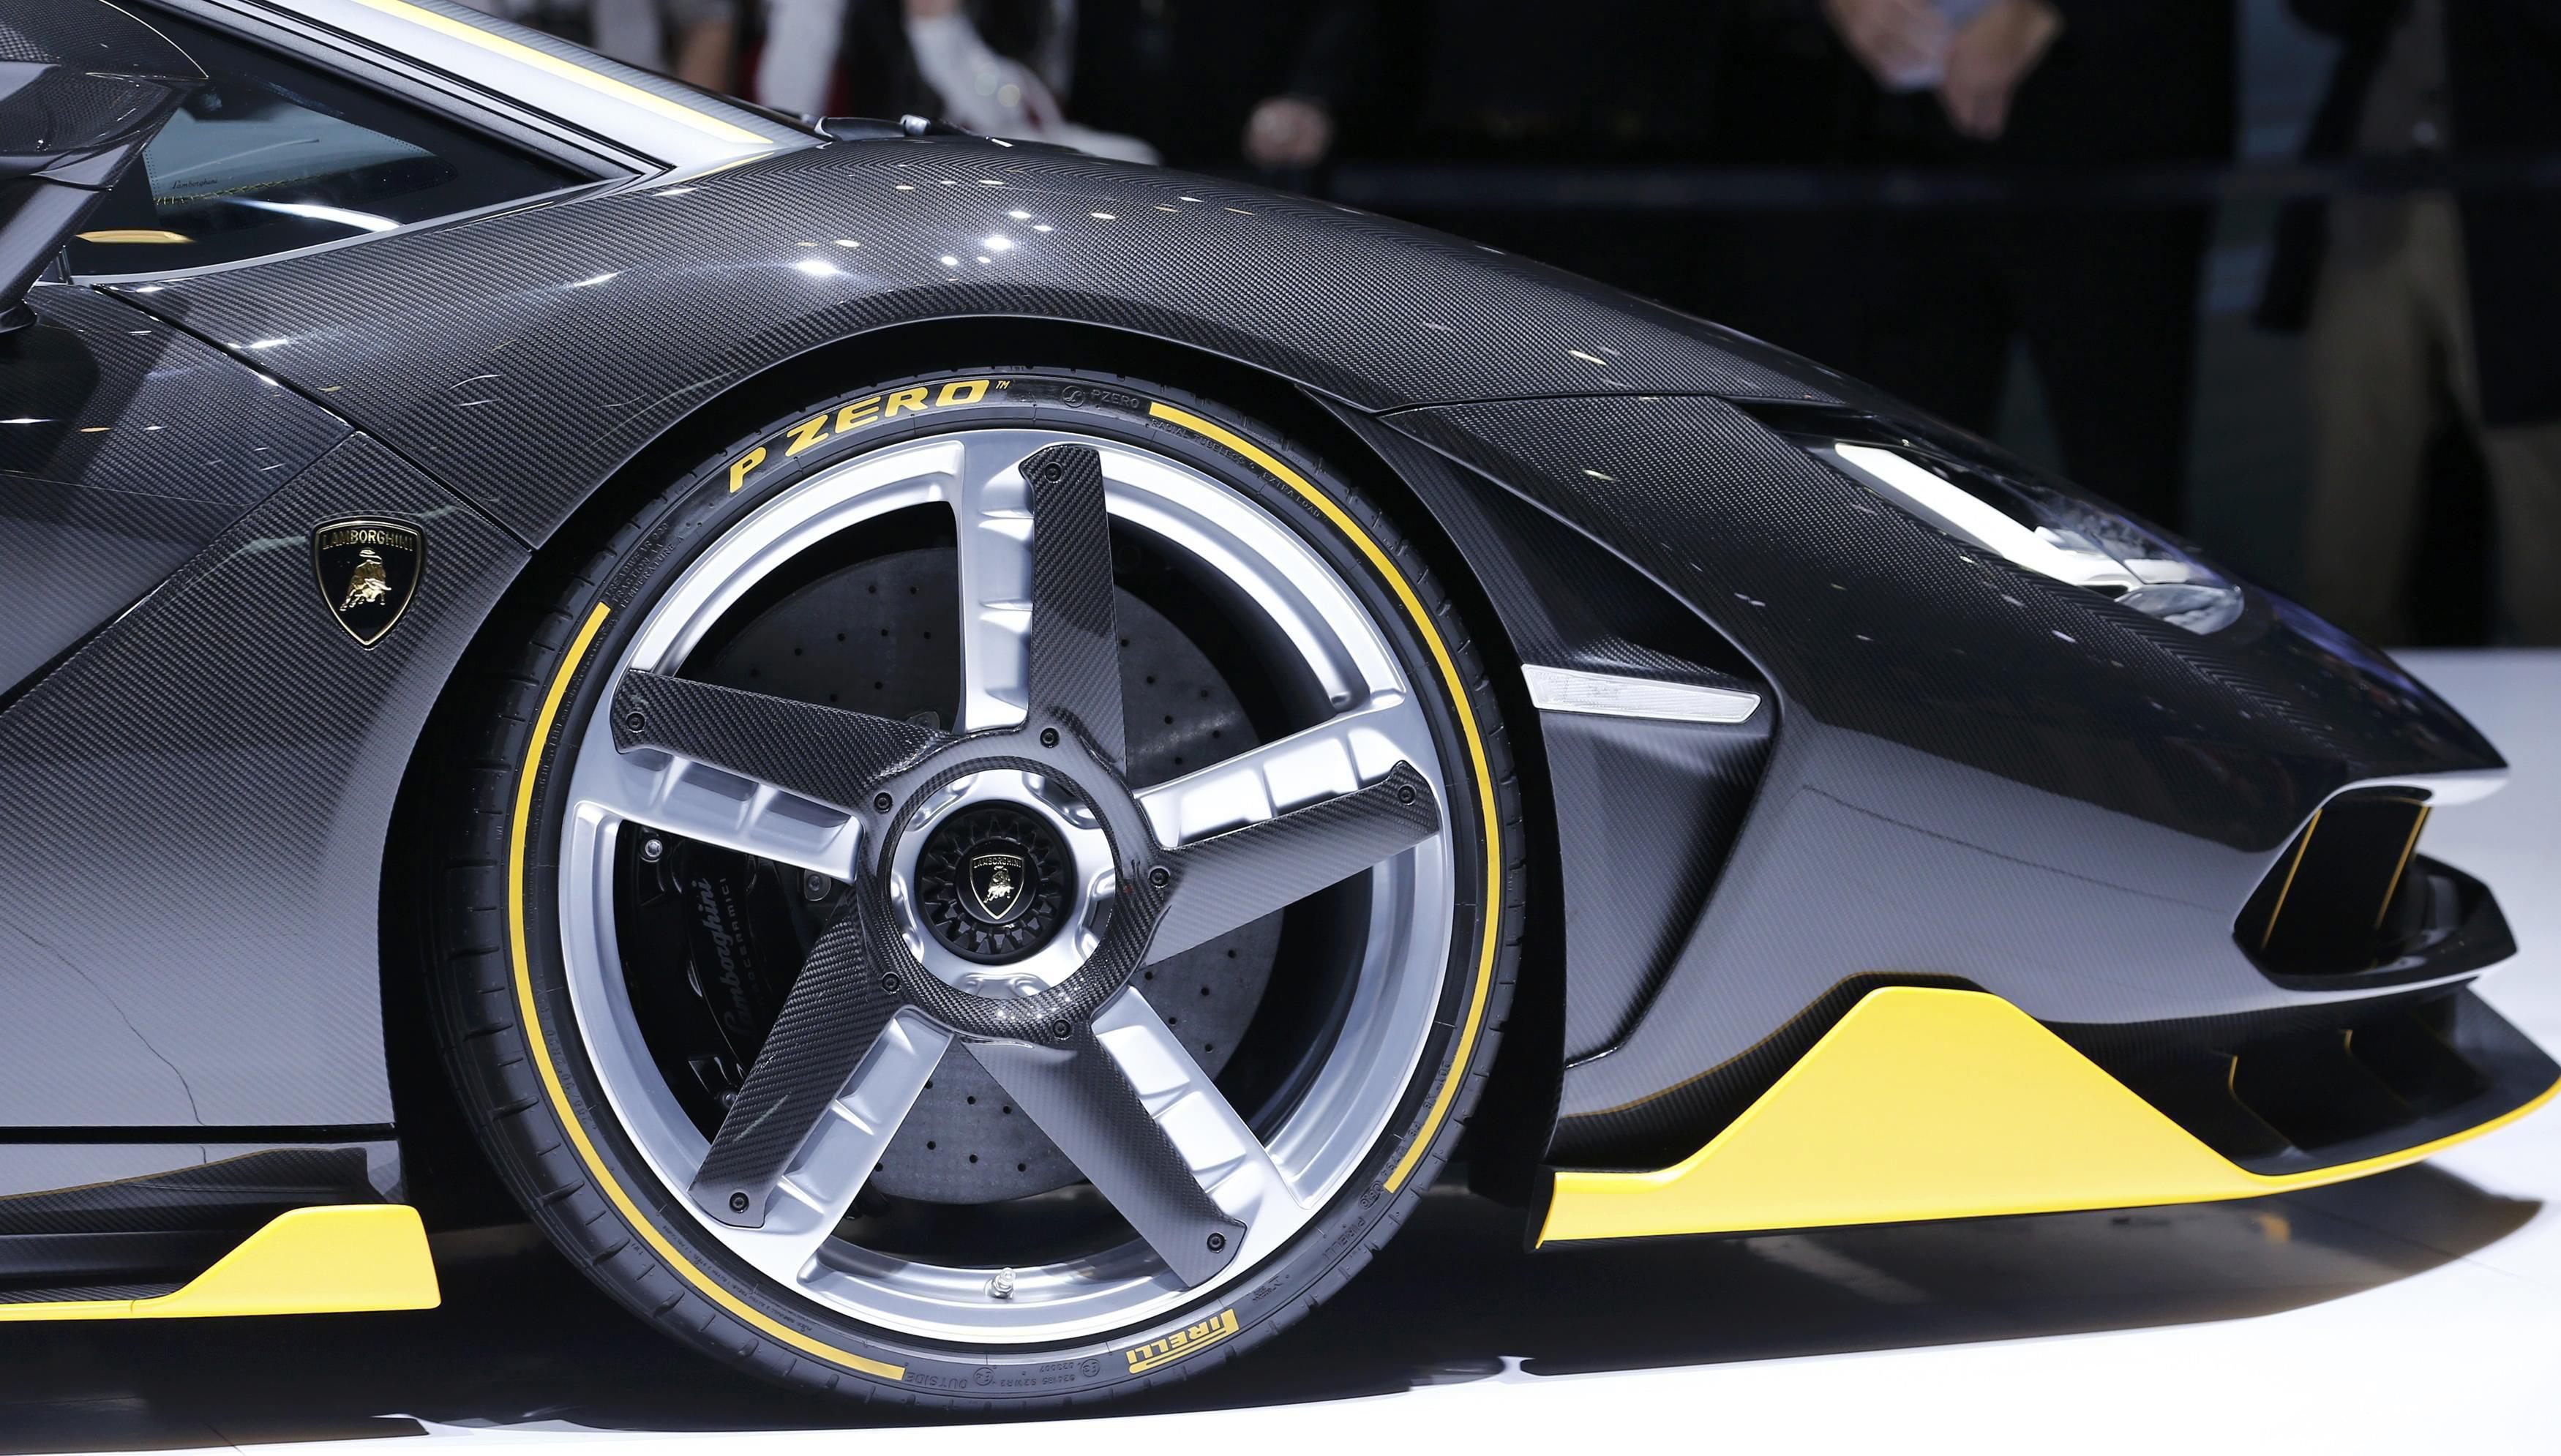 Front of the new Lamborghini Centenario car is pictured at the 86th International Motor Show in Gene